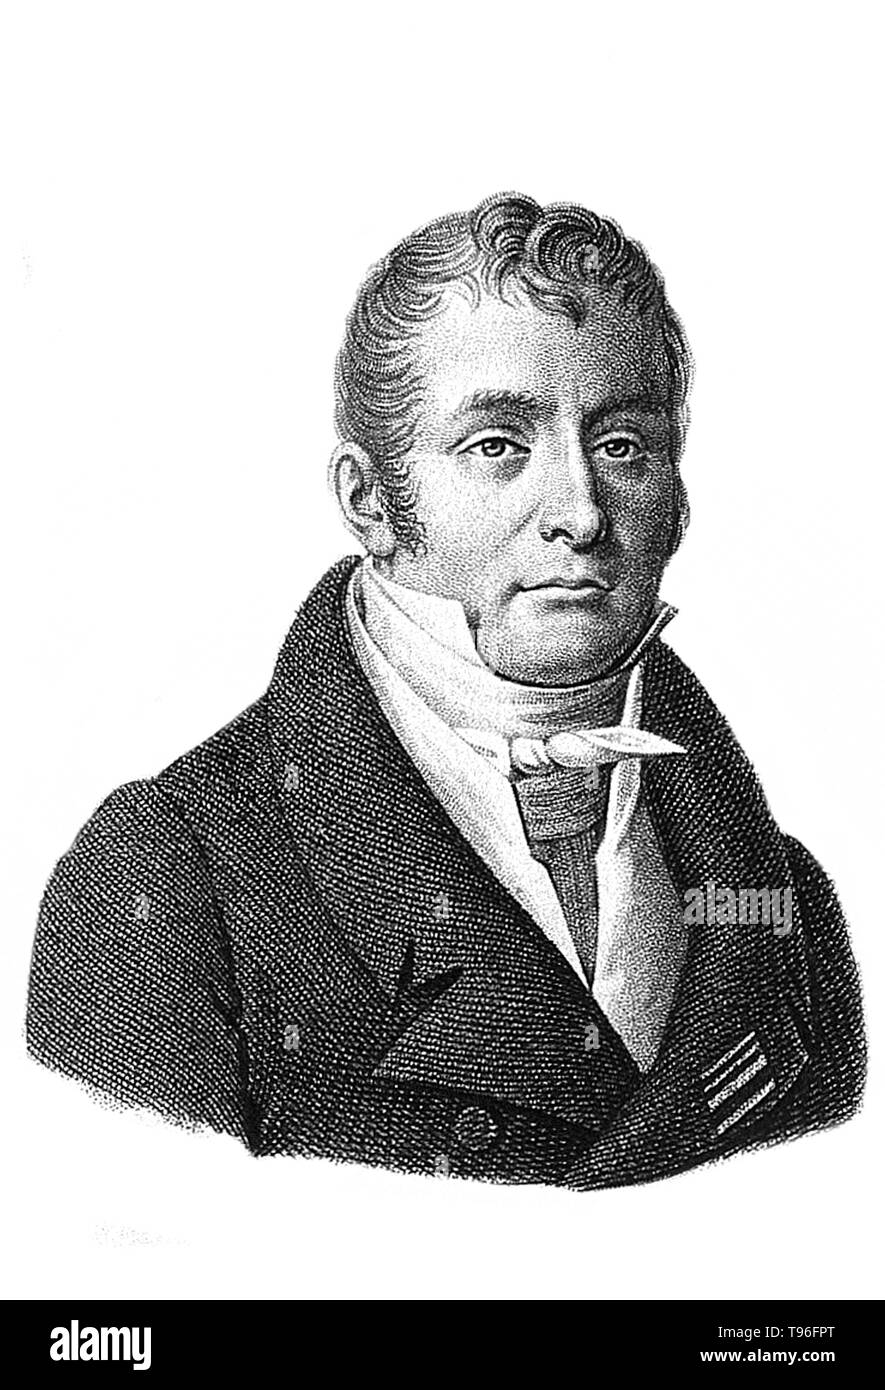 Baron Guillaume Dupuytren (October 5, 1777 - February 8, 1835) was a French anatomist and military surgeon. Although he gained much esteem for treating Napoleon Bonaparte's hemorrhoids, he is best known today for his description of Dupuytren's contracture which is named after him and which he first operated on in 1831 and published in The Lancet in 1834. He died in 1835 at the age of 57. Stock Photo